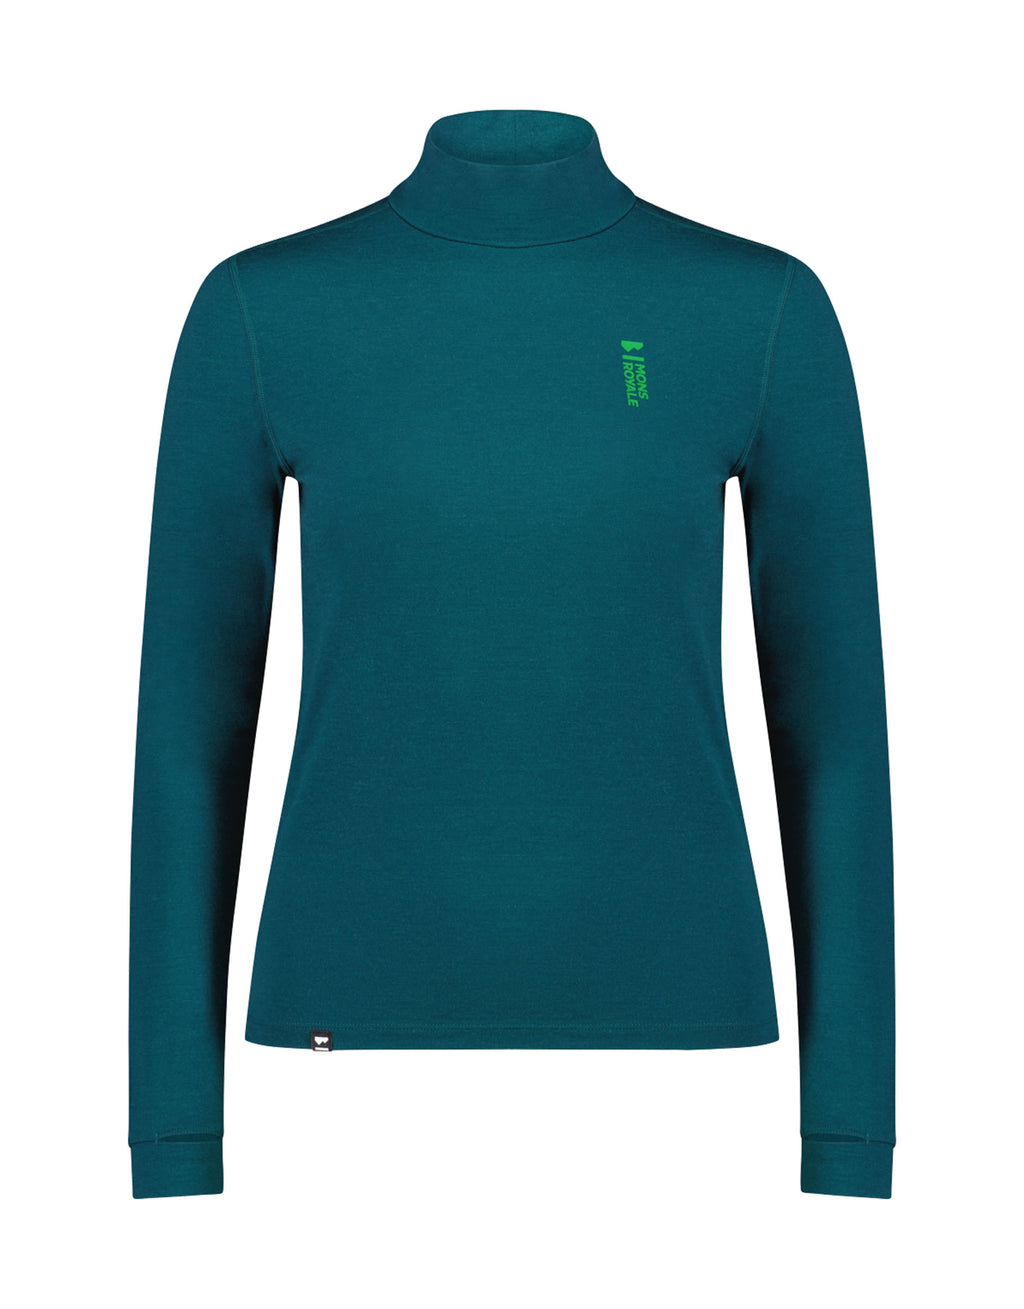 Mons Royale Cascade Mock Neck Womens Thermal Top 